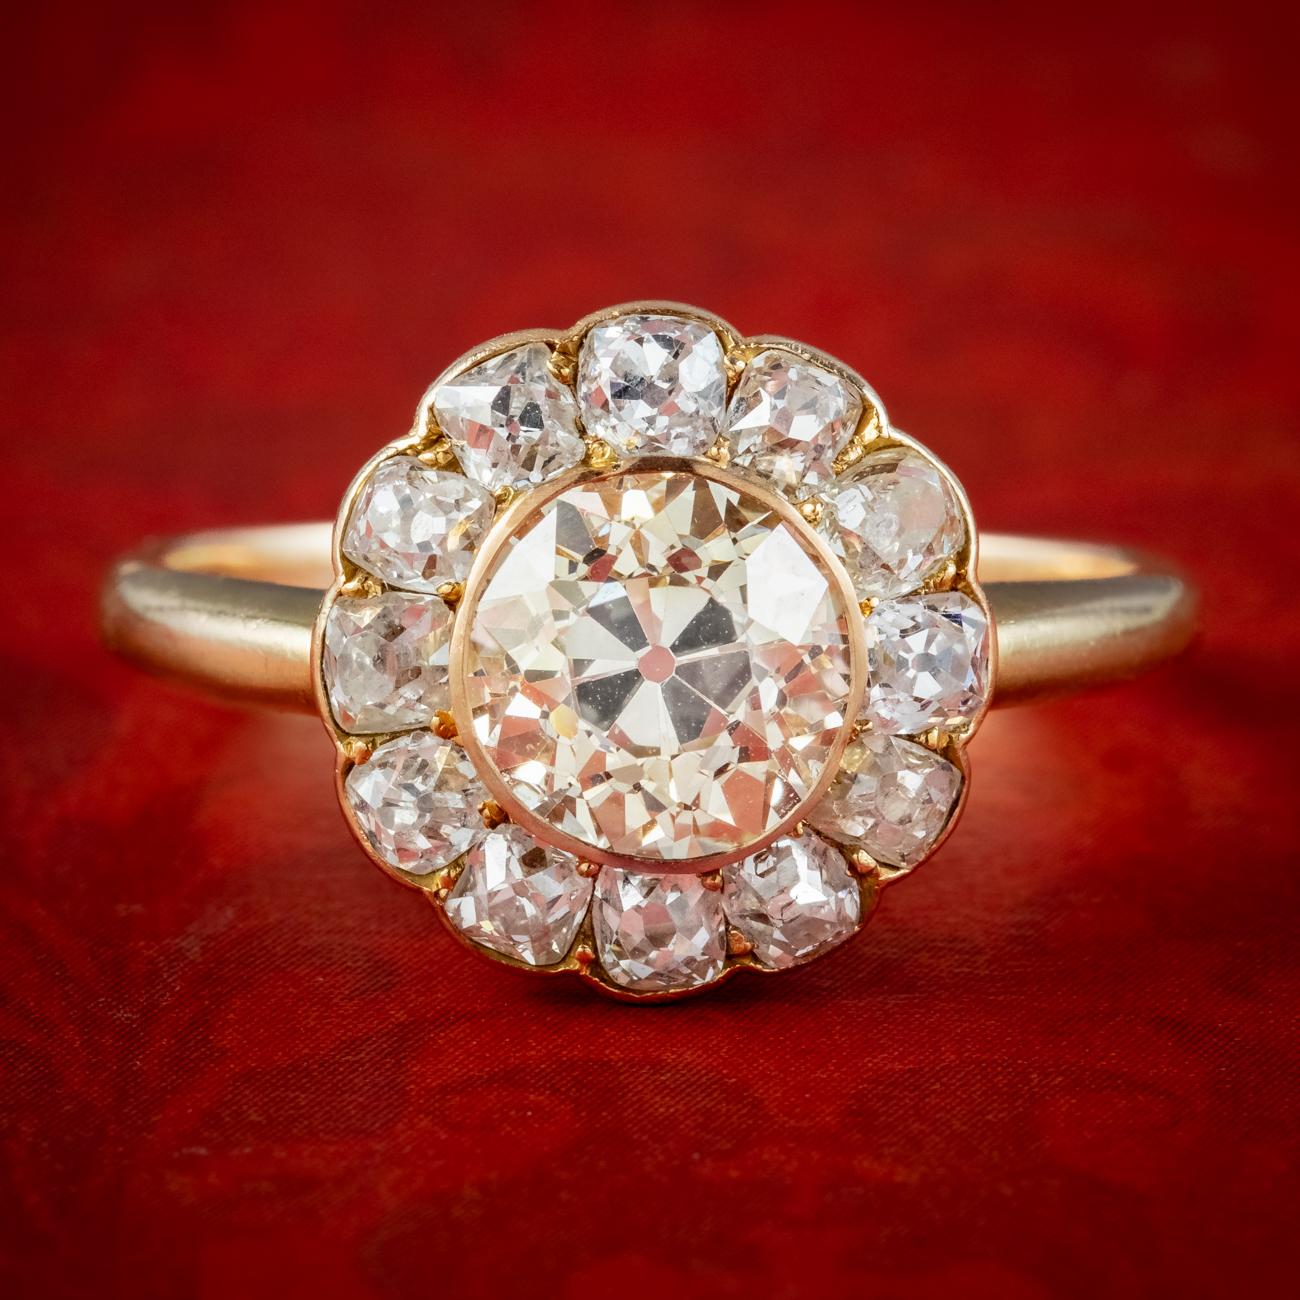 A stunning antique Victorian daisy cluster ring crowned with a magnificent old cut fancy diamond bezel set in the centre, haloed by twelve smaller old cushion cut petals around the border. The centre stone has a subtle champagne hue and sparkles